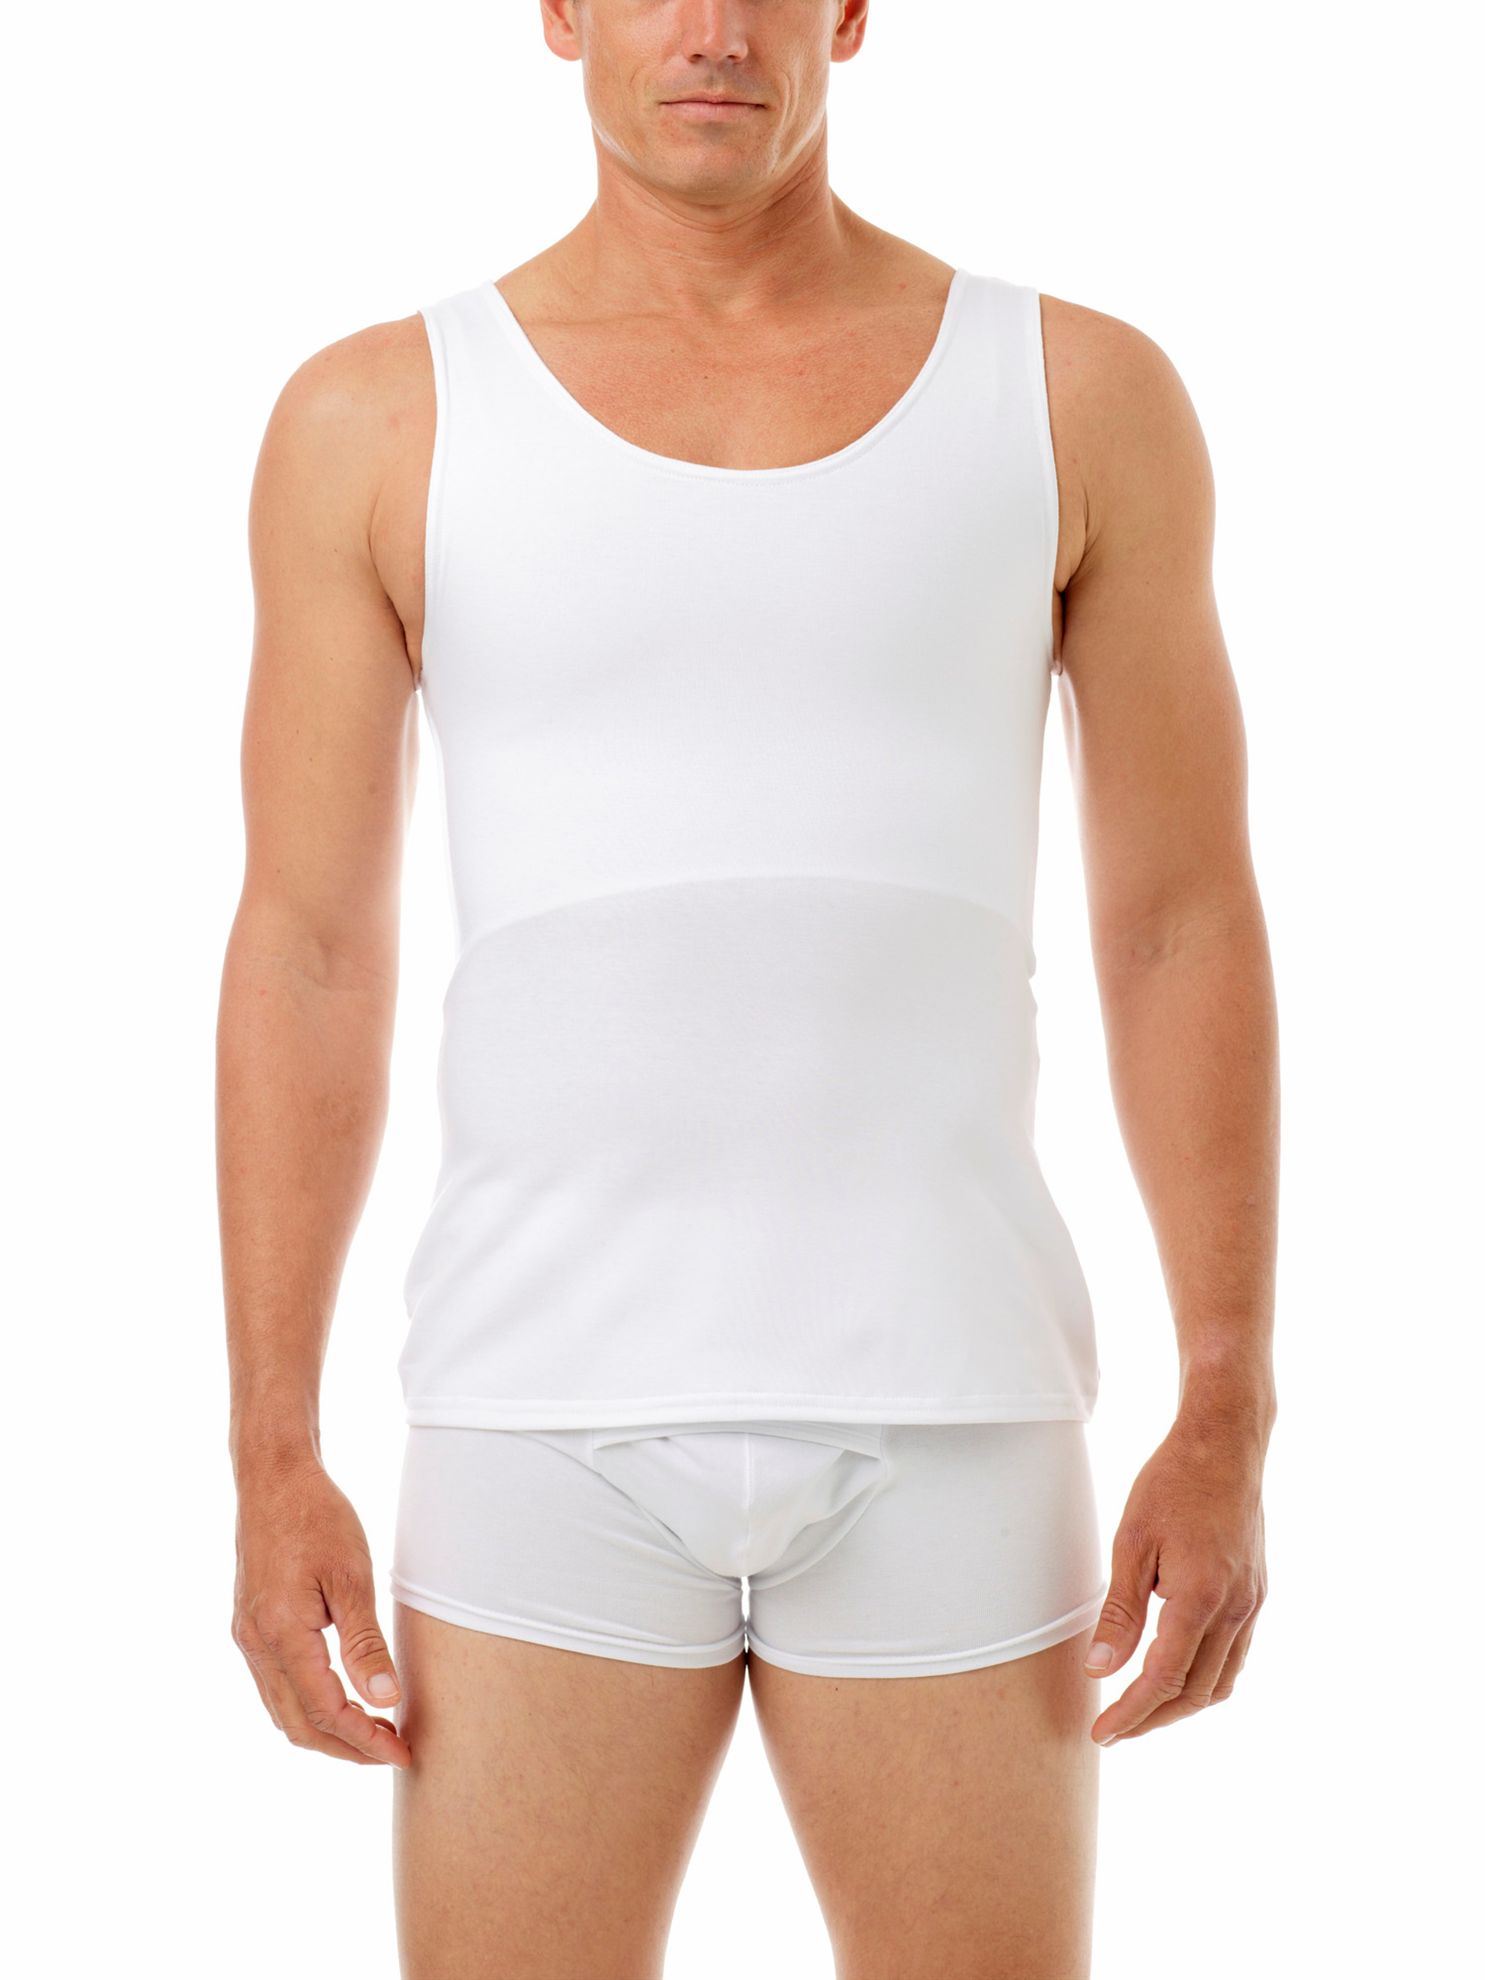 Cotton Compression Sports Bra  Orders Over $75 Ship Free. FTM Chest Binders  for Trans Men by Underworks